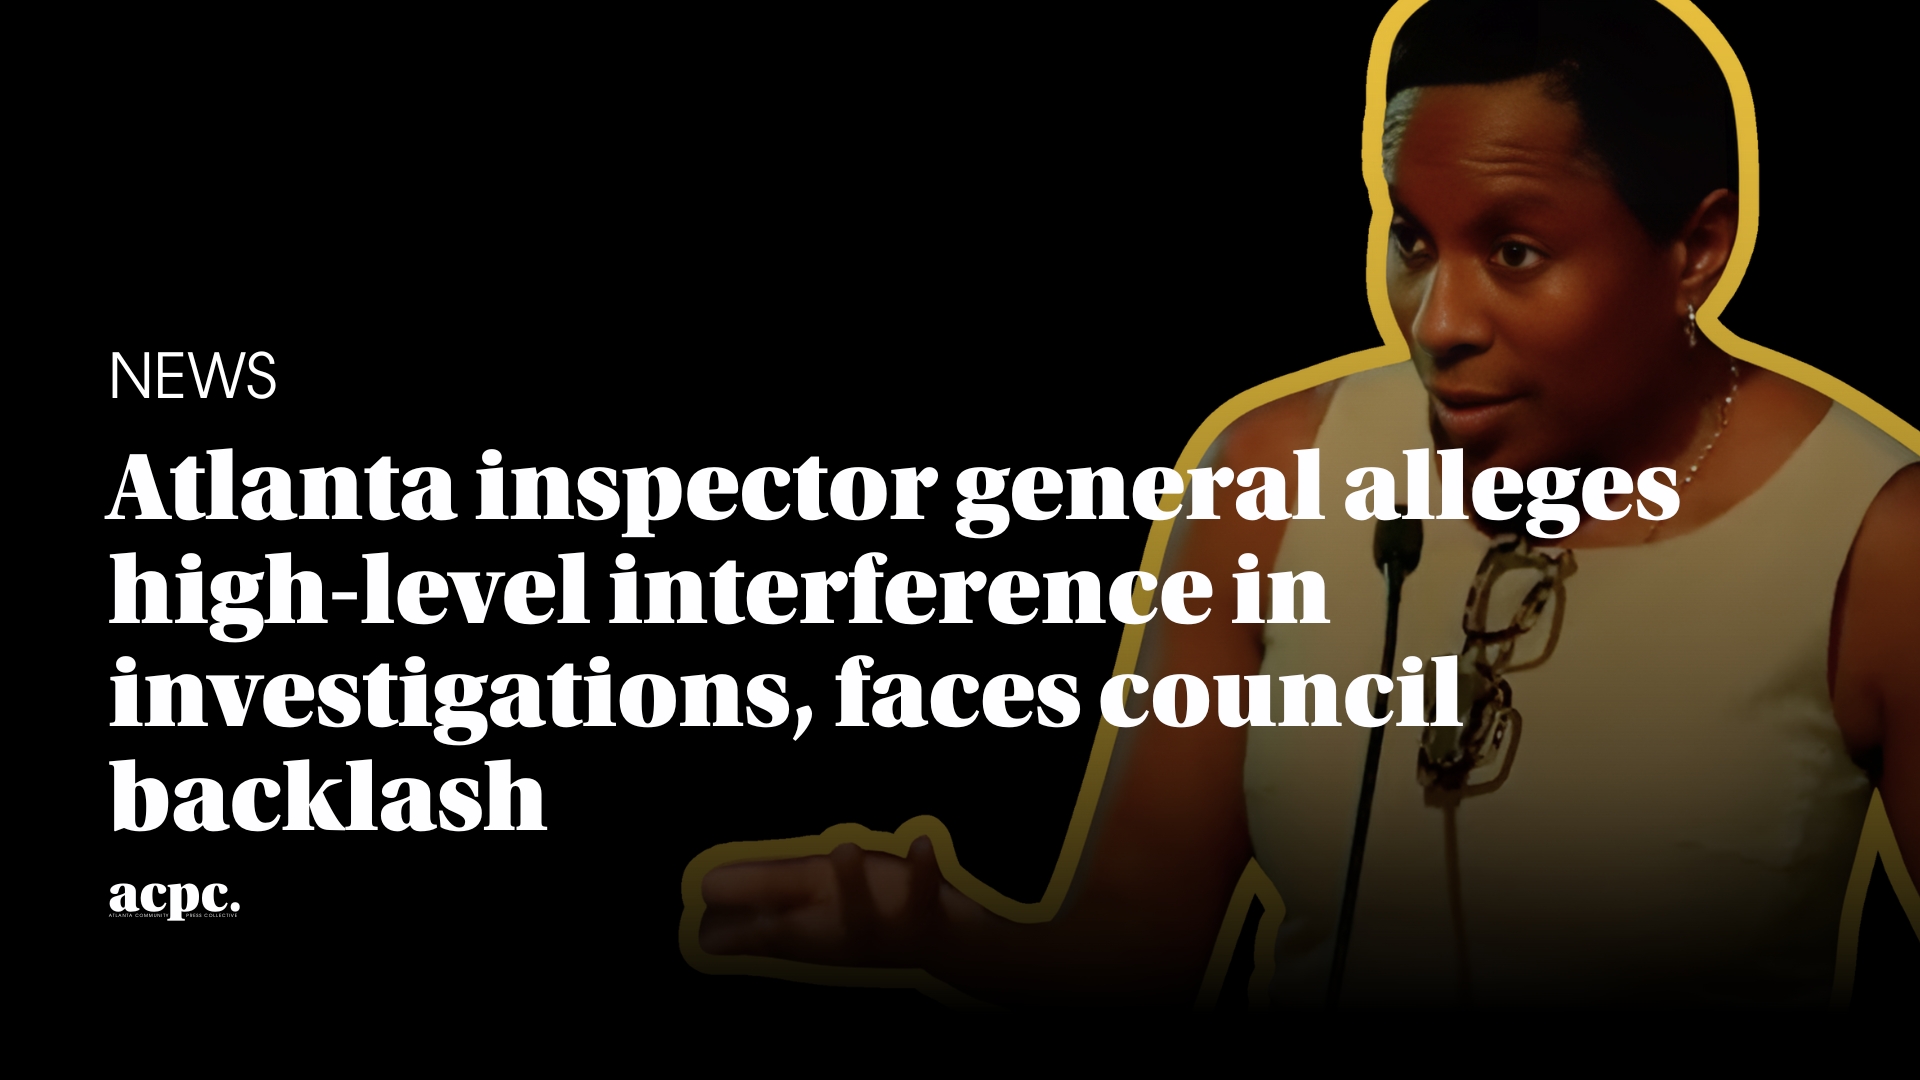 Atlanta inspector general alleges high-level interference in investigations, faces council backlash